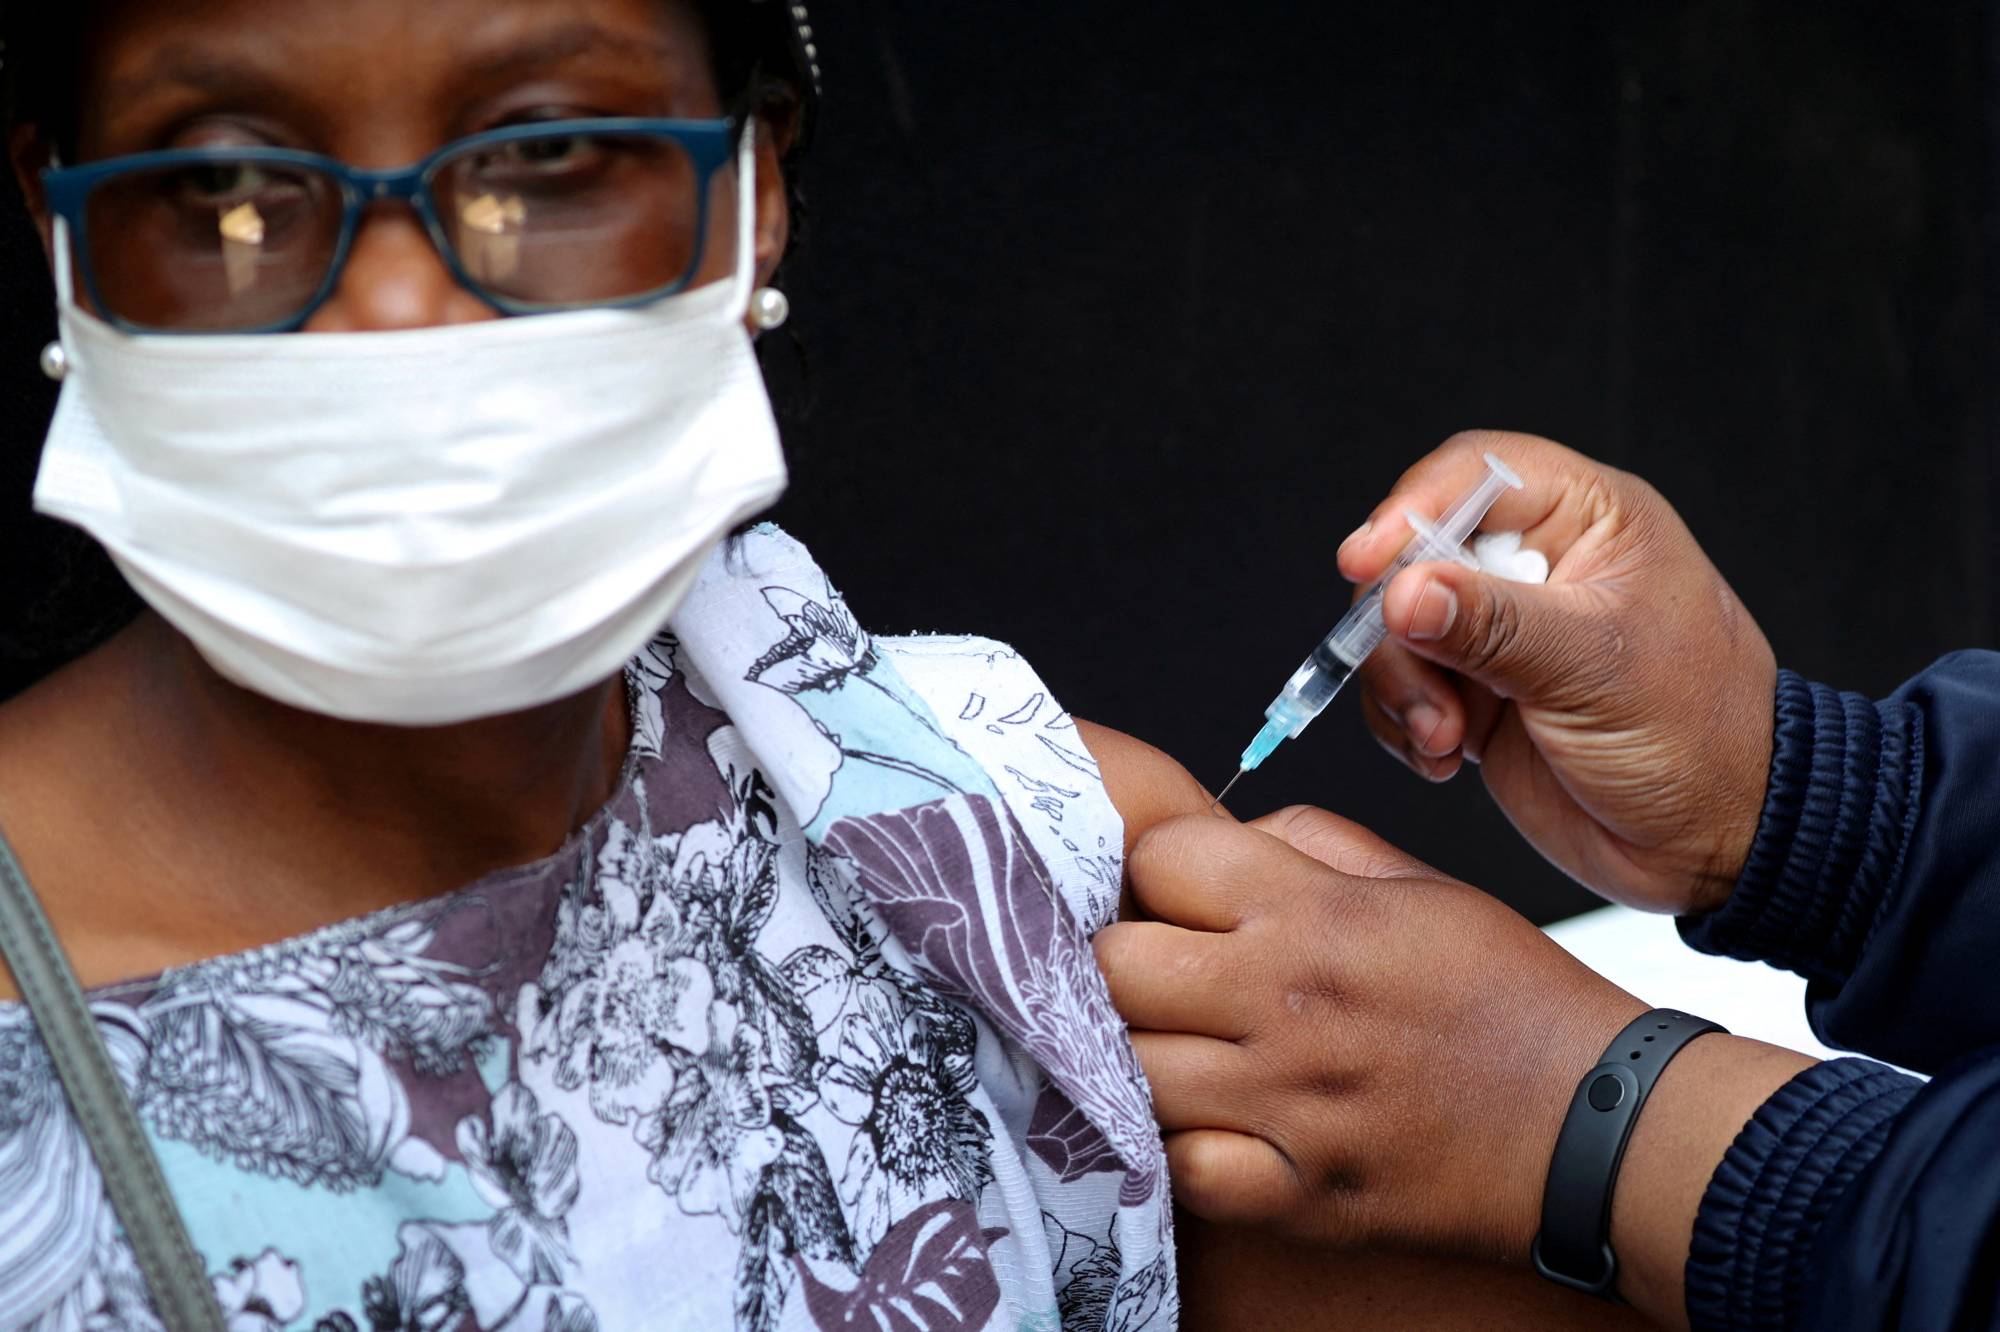 A health care worker administers the Johnson & Johnson COVID-19 vaccination to a woman in Johannesburg on Aug. 20. | REUTERS